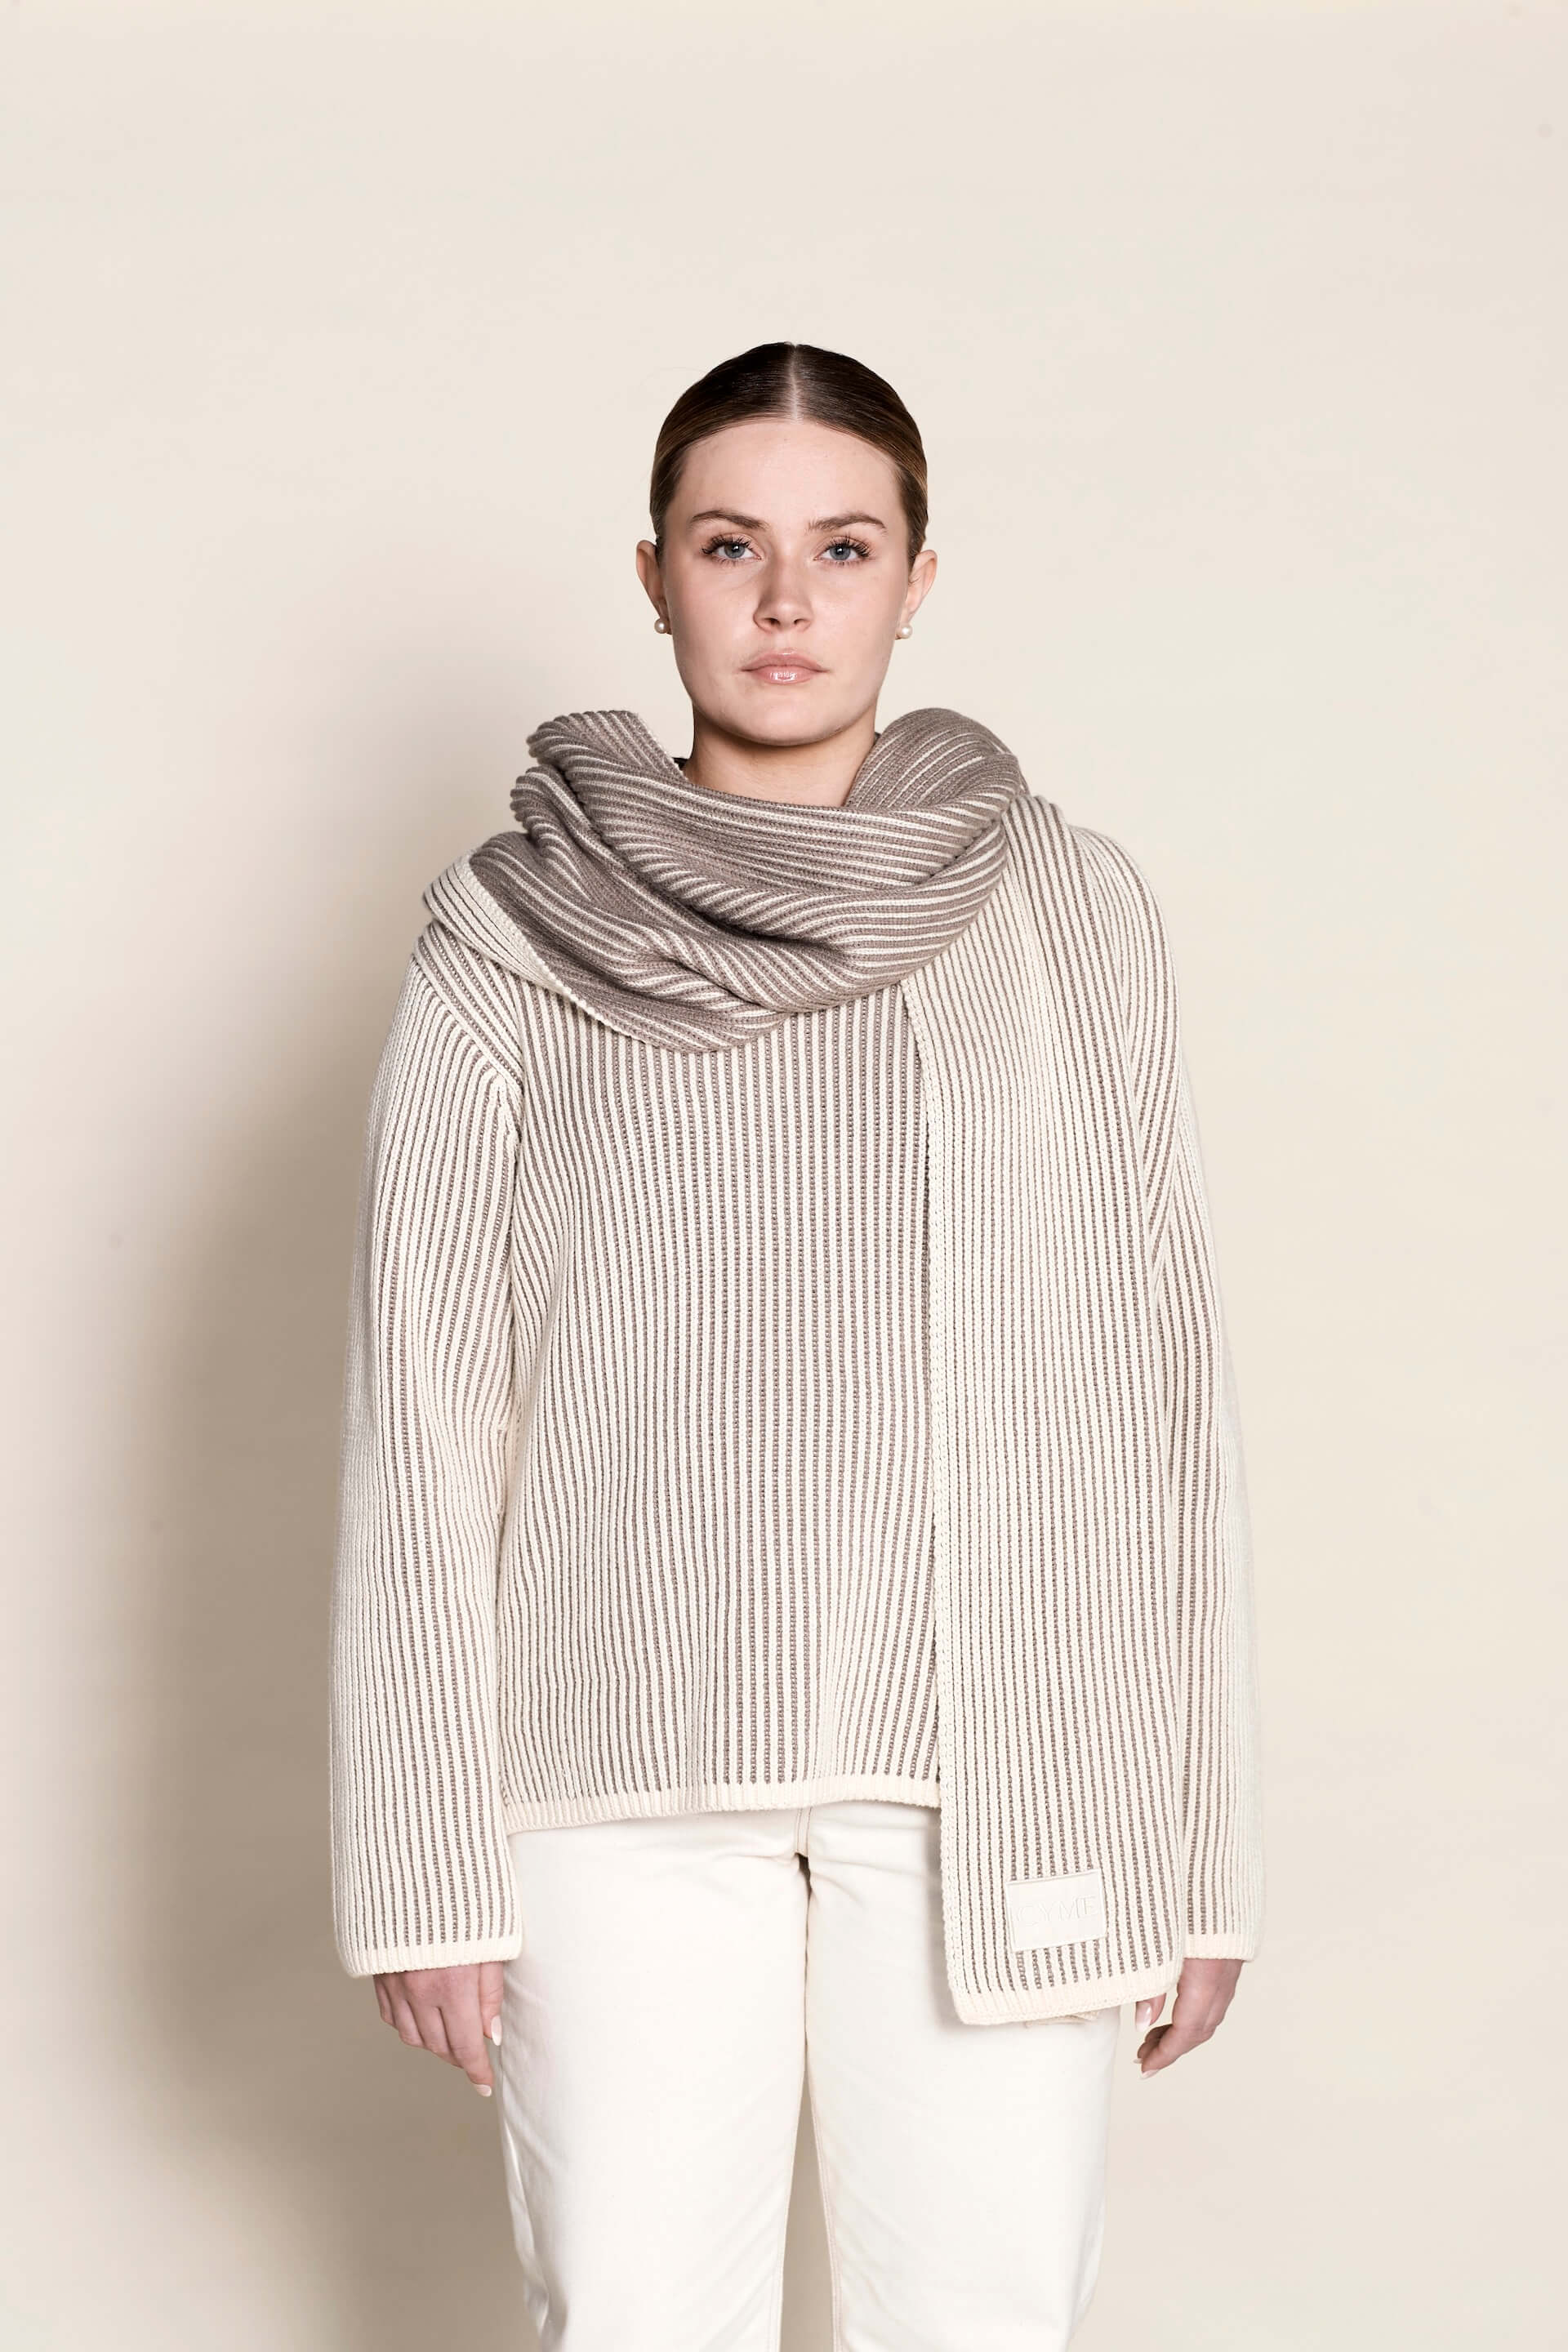 A model poses in Cyme Copenhagen's elegant cashmere knit sweater in cream, paired with a matching luxurious scarf, exemplifying the brand's commitment to sustainable fashion and natural materials.